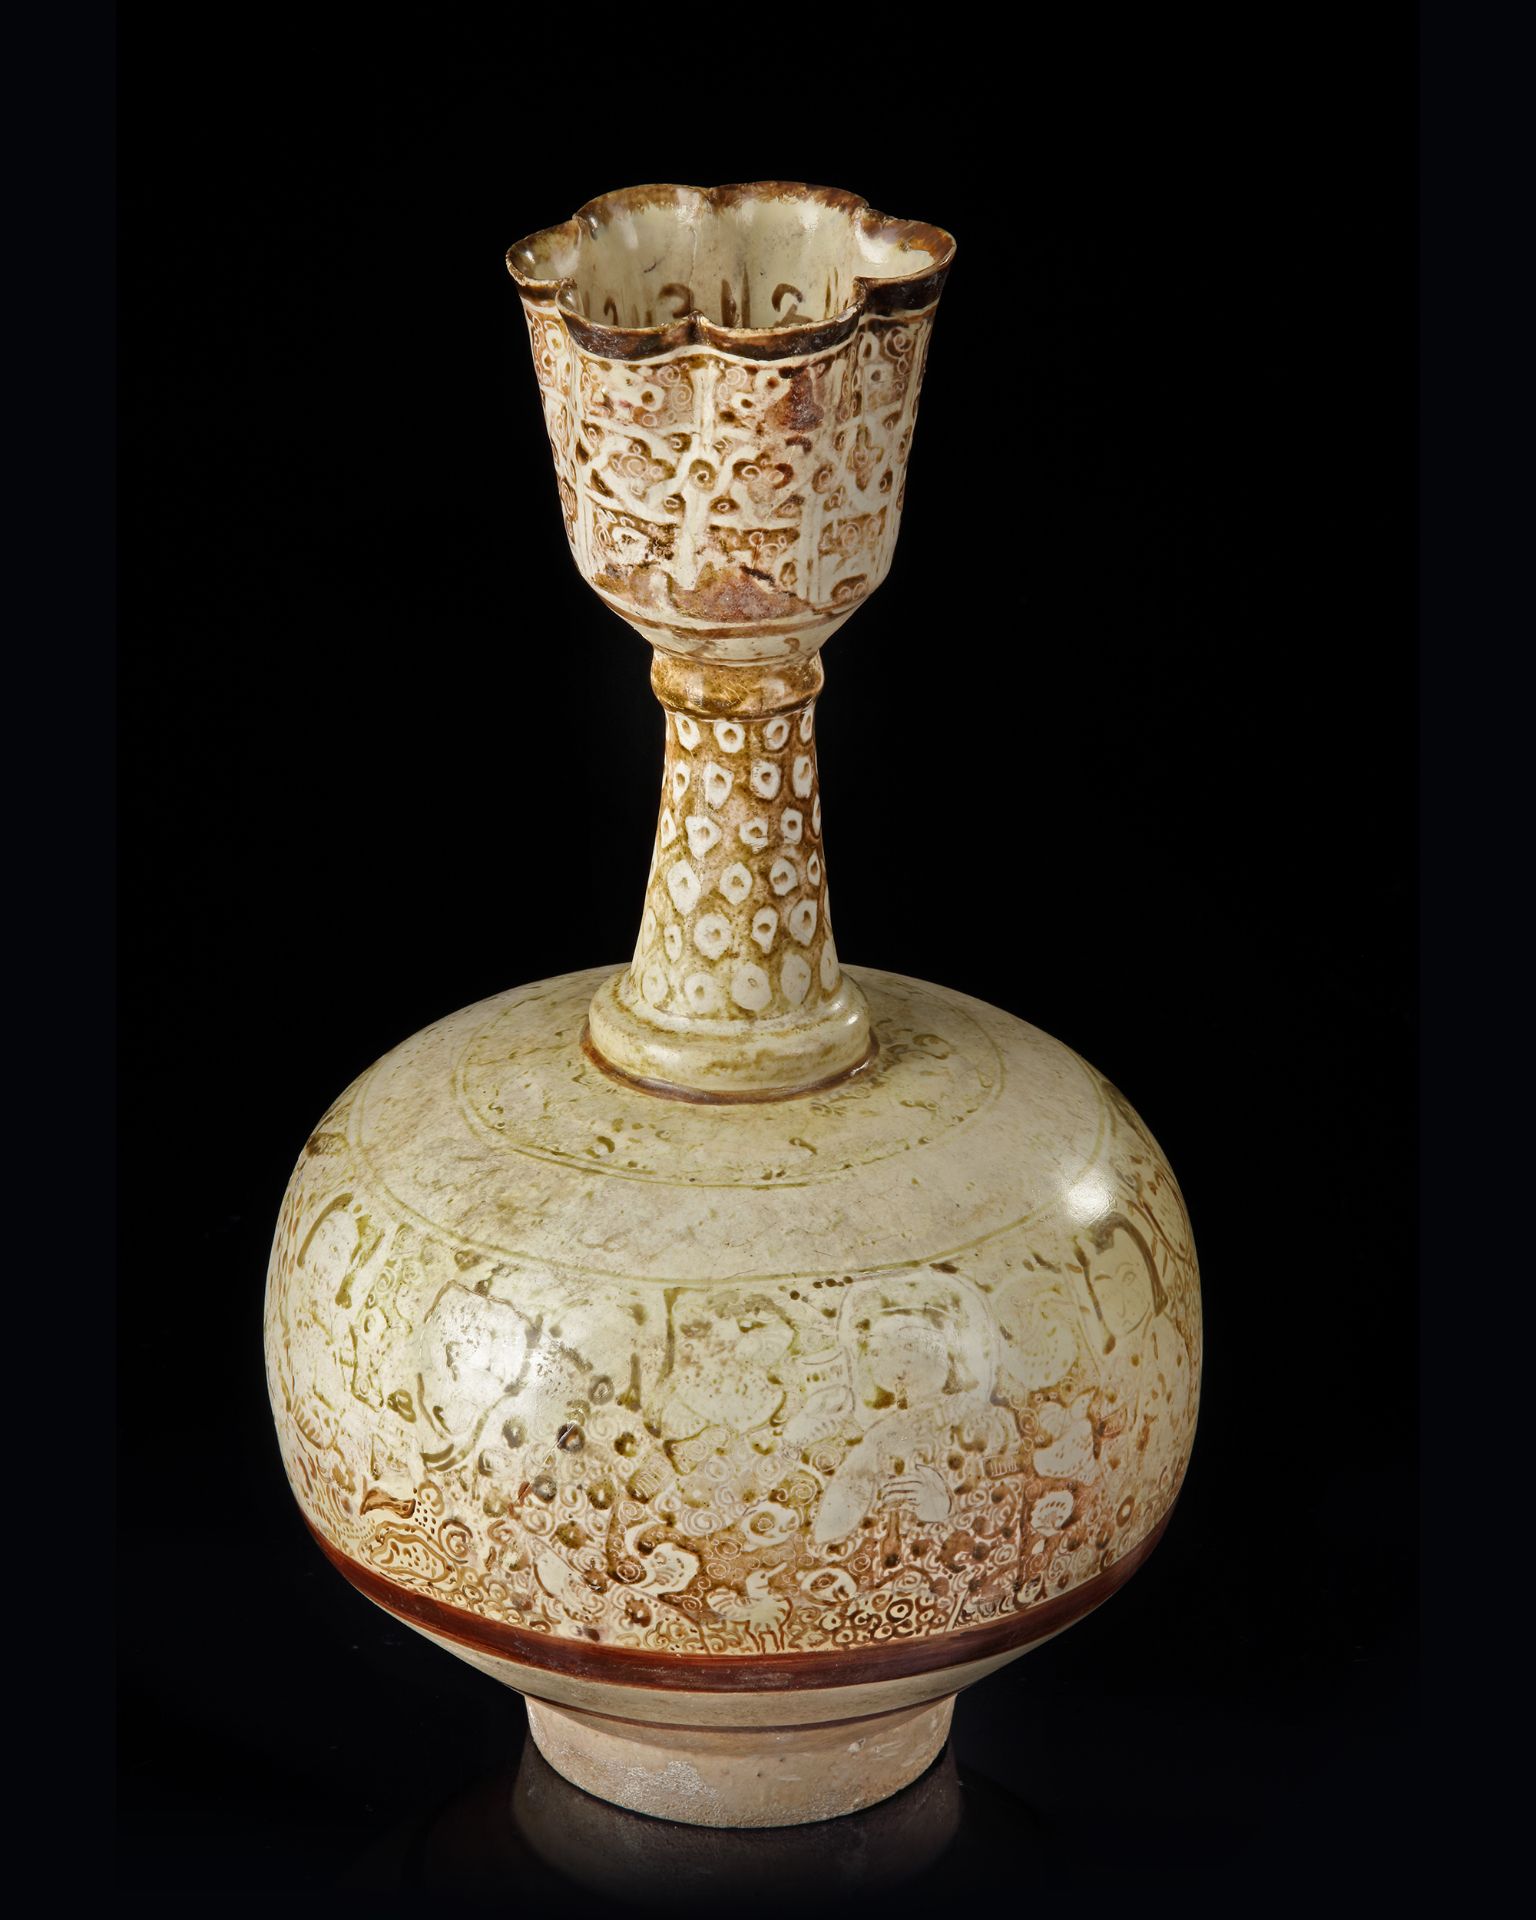 A KASHAN LUSTRE POTTERY BOTTLE VASE, PERSIA, EARLY 13TH CENTURY - Image 6 of 10